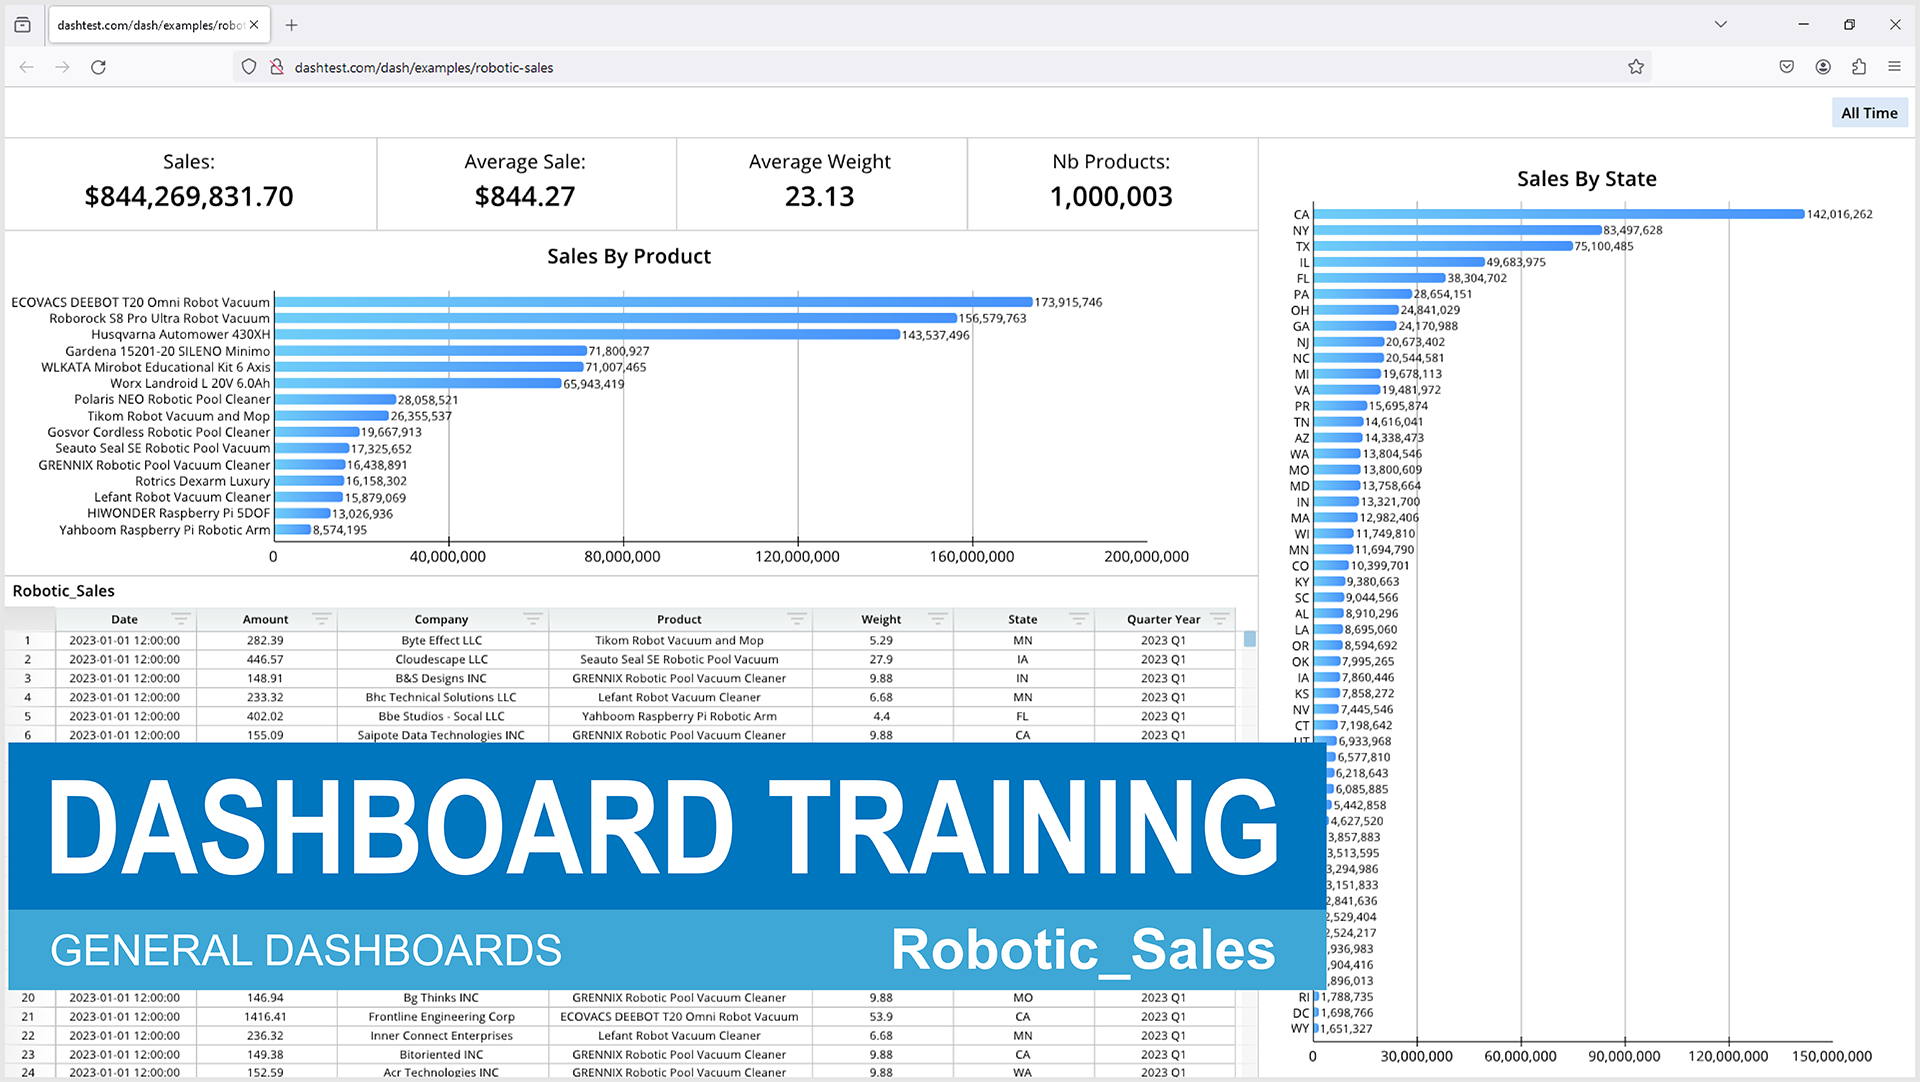 A screenshot of a dashboard training program, showcasing various graphs and data points.